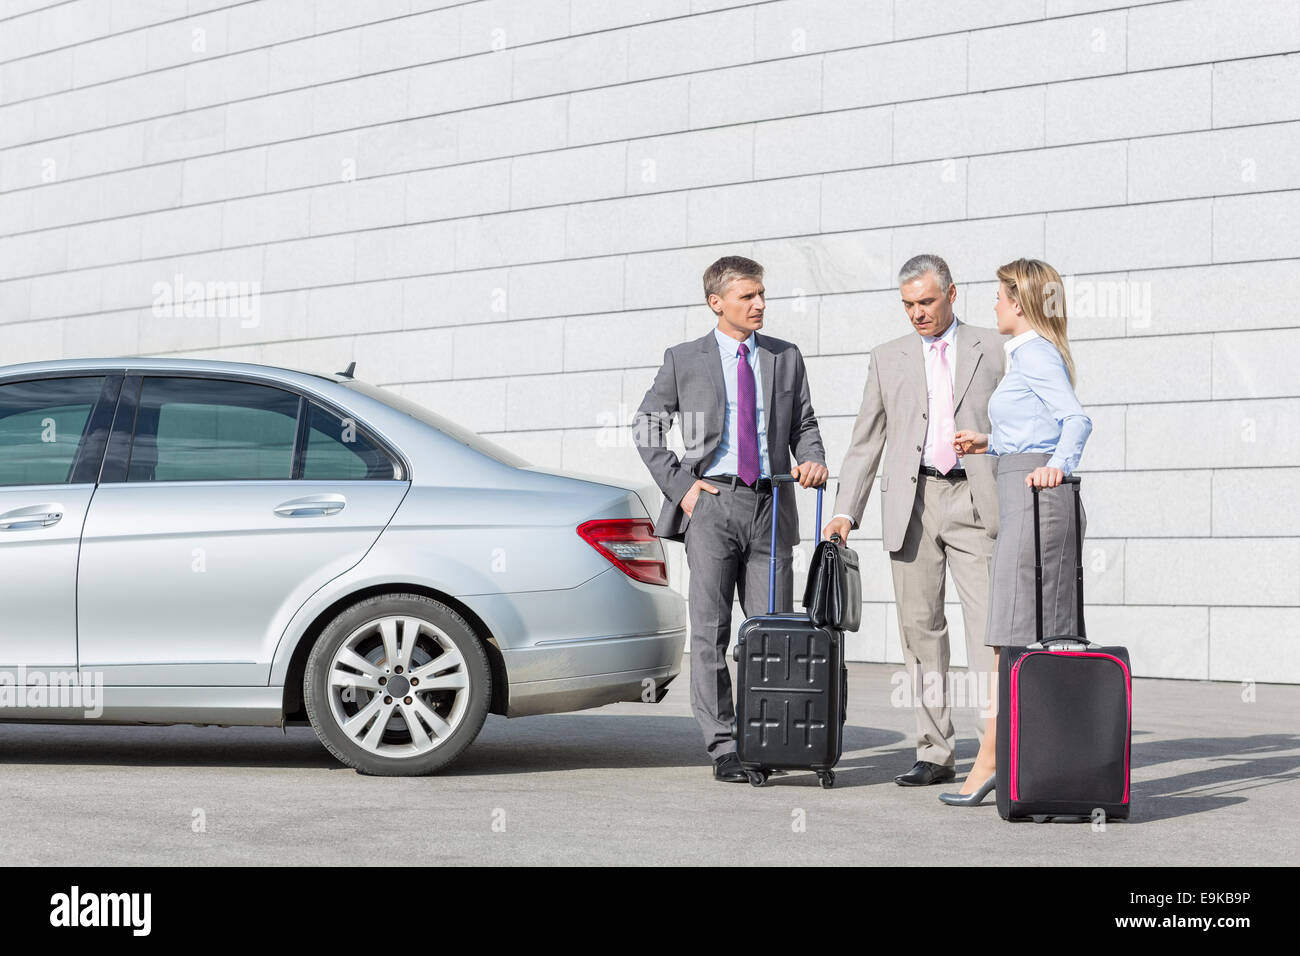 Businesspeople with luggage discussing outside car on street Stock Photo